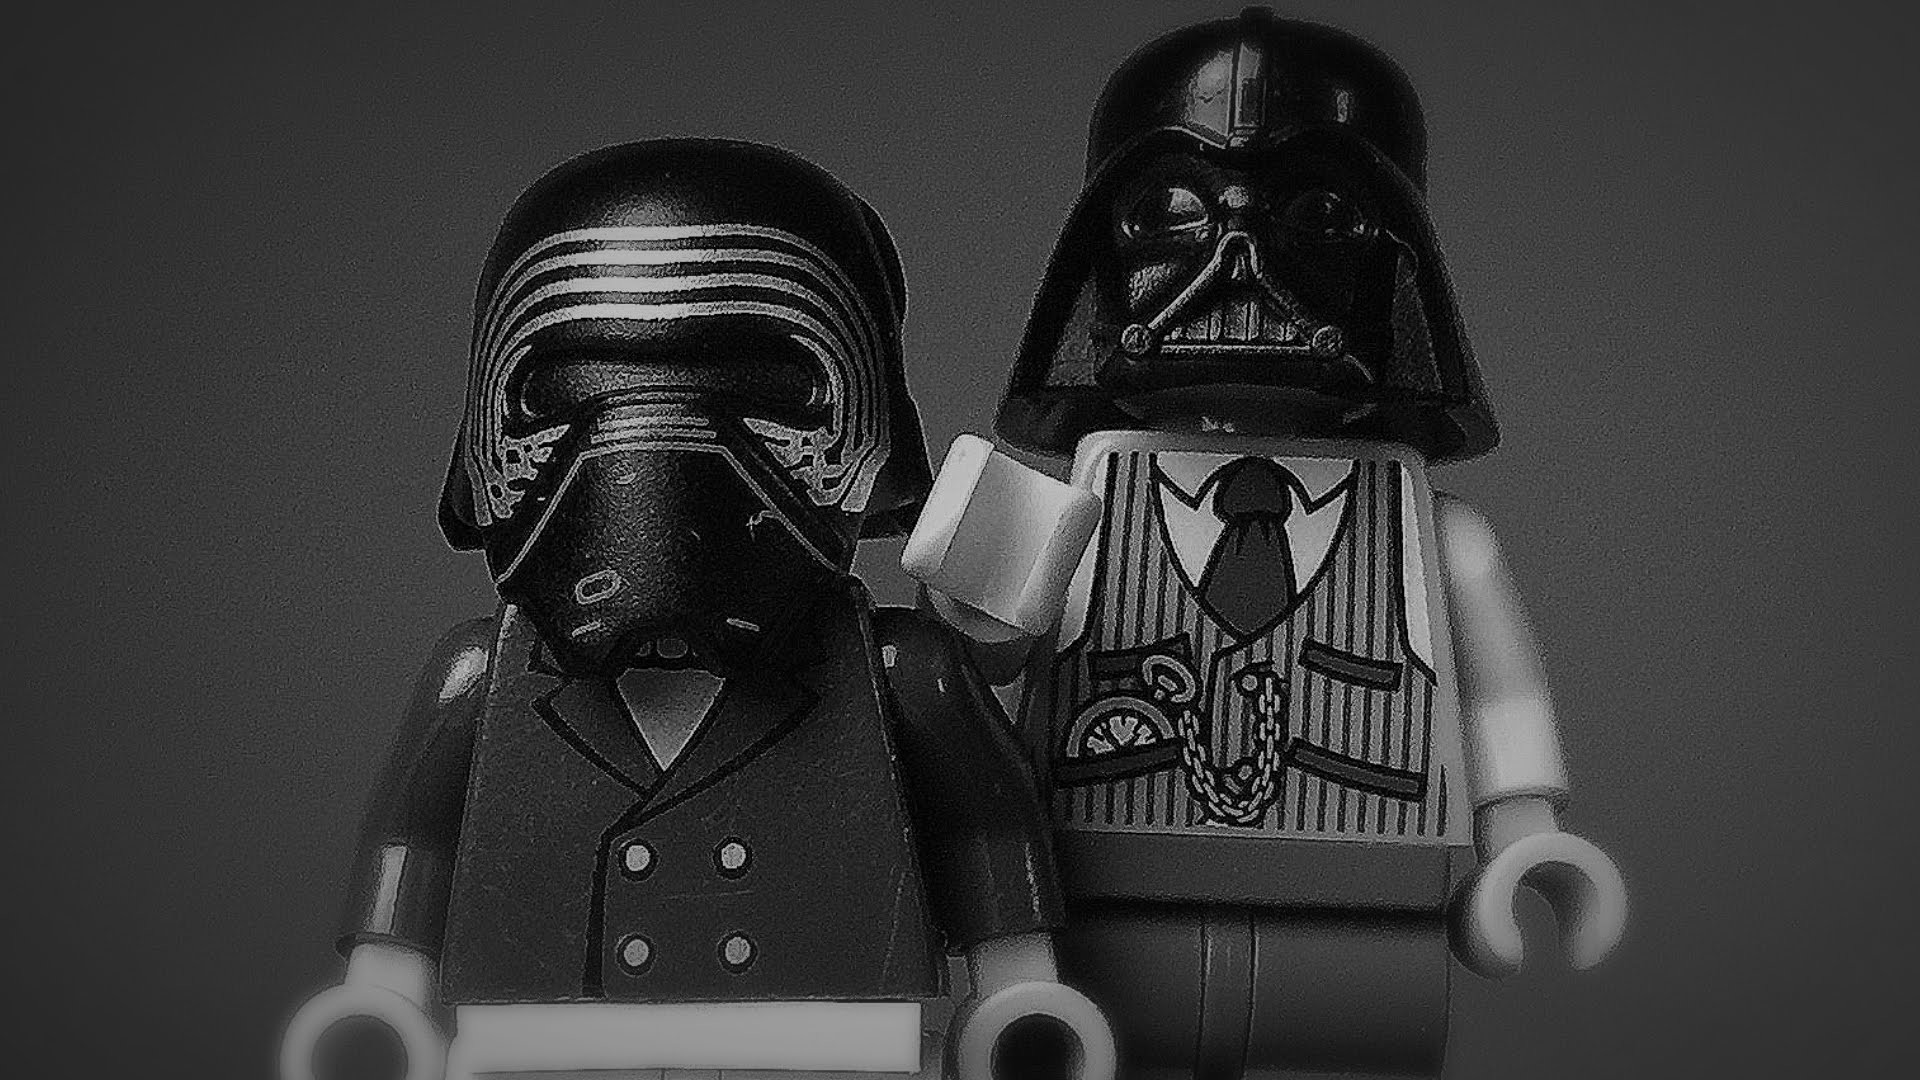 1920x1080 Lego Star Wars: Grandpa Vader and Kylo Ren (Feat. AKPstudios) - YouTube